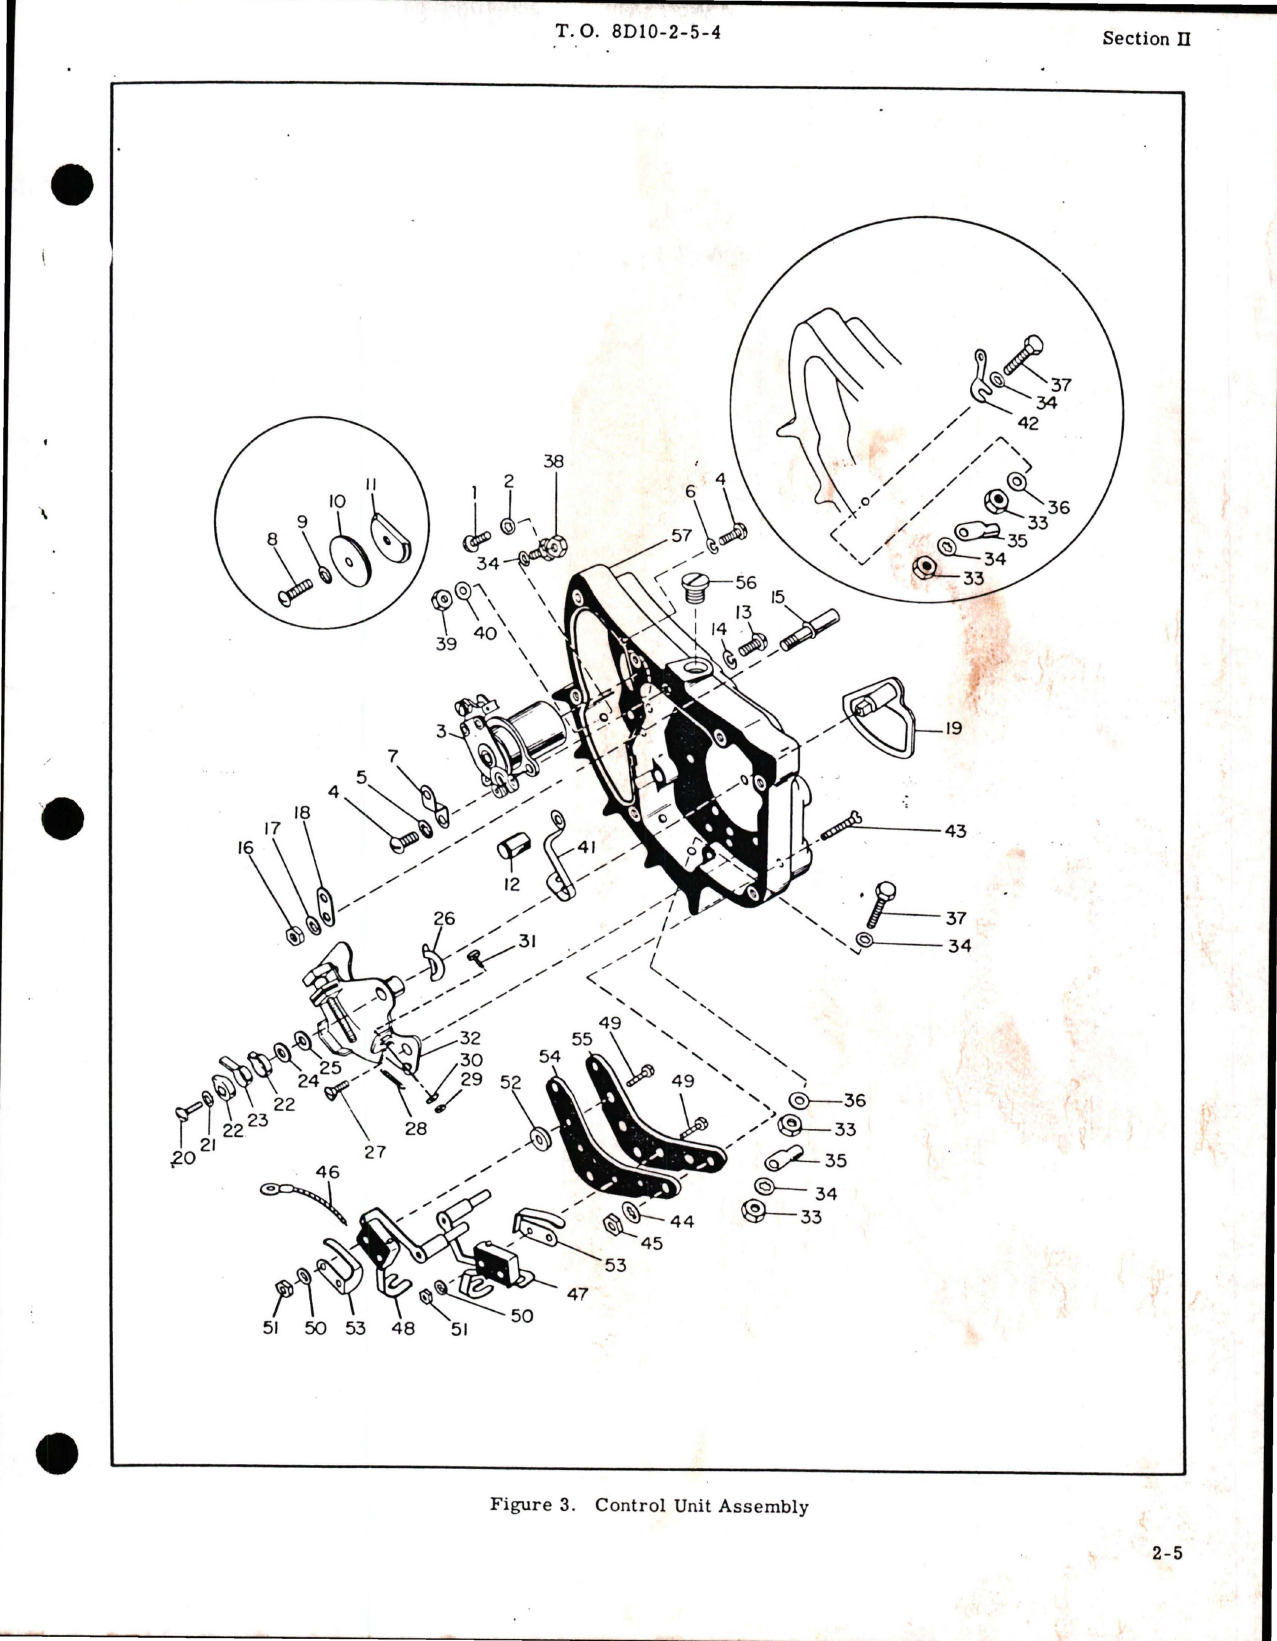 Sample page 7 from AirCorps Library document: Illustrated Parts Breakdown for Electrically Retractable Landing Light Assemblies - Part G-3800A Series - Change 2